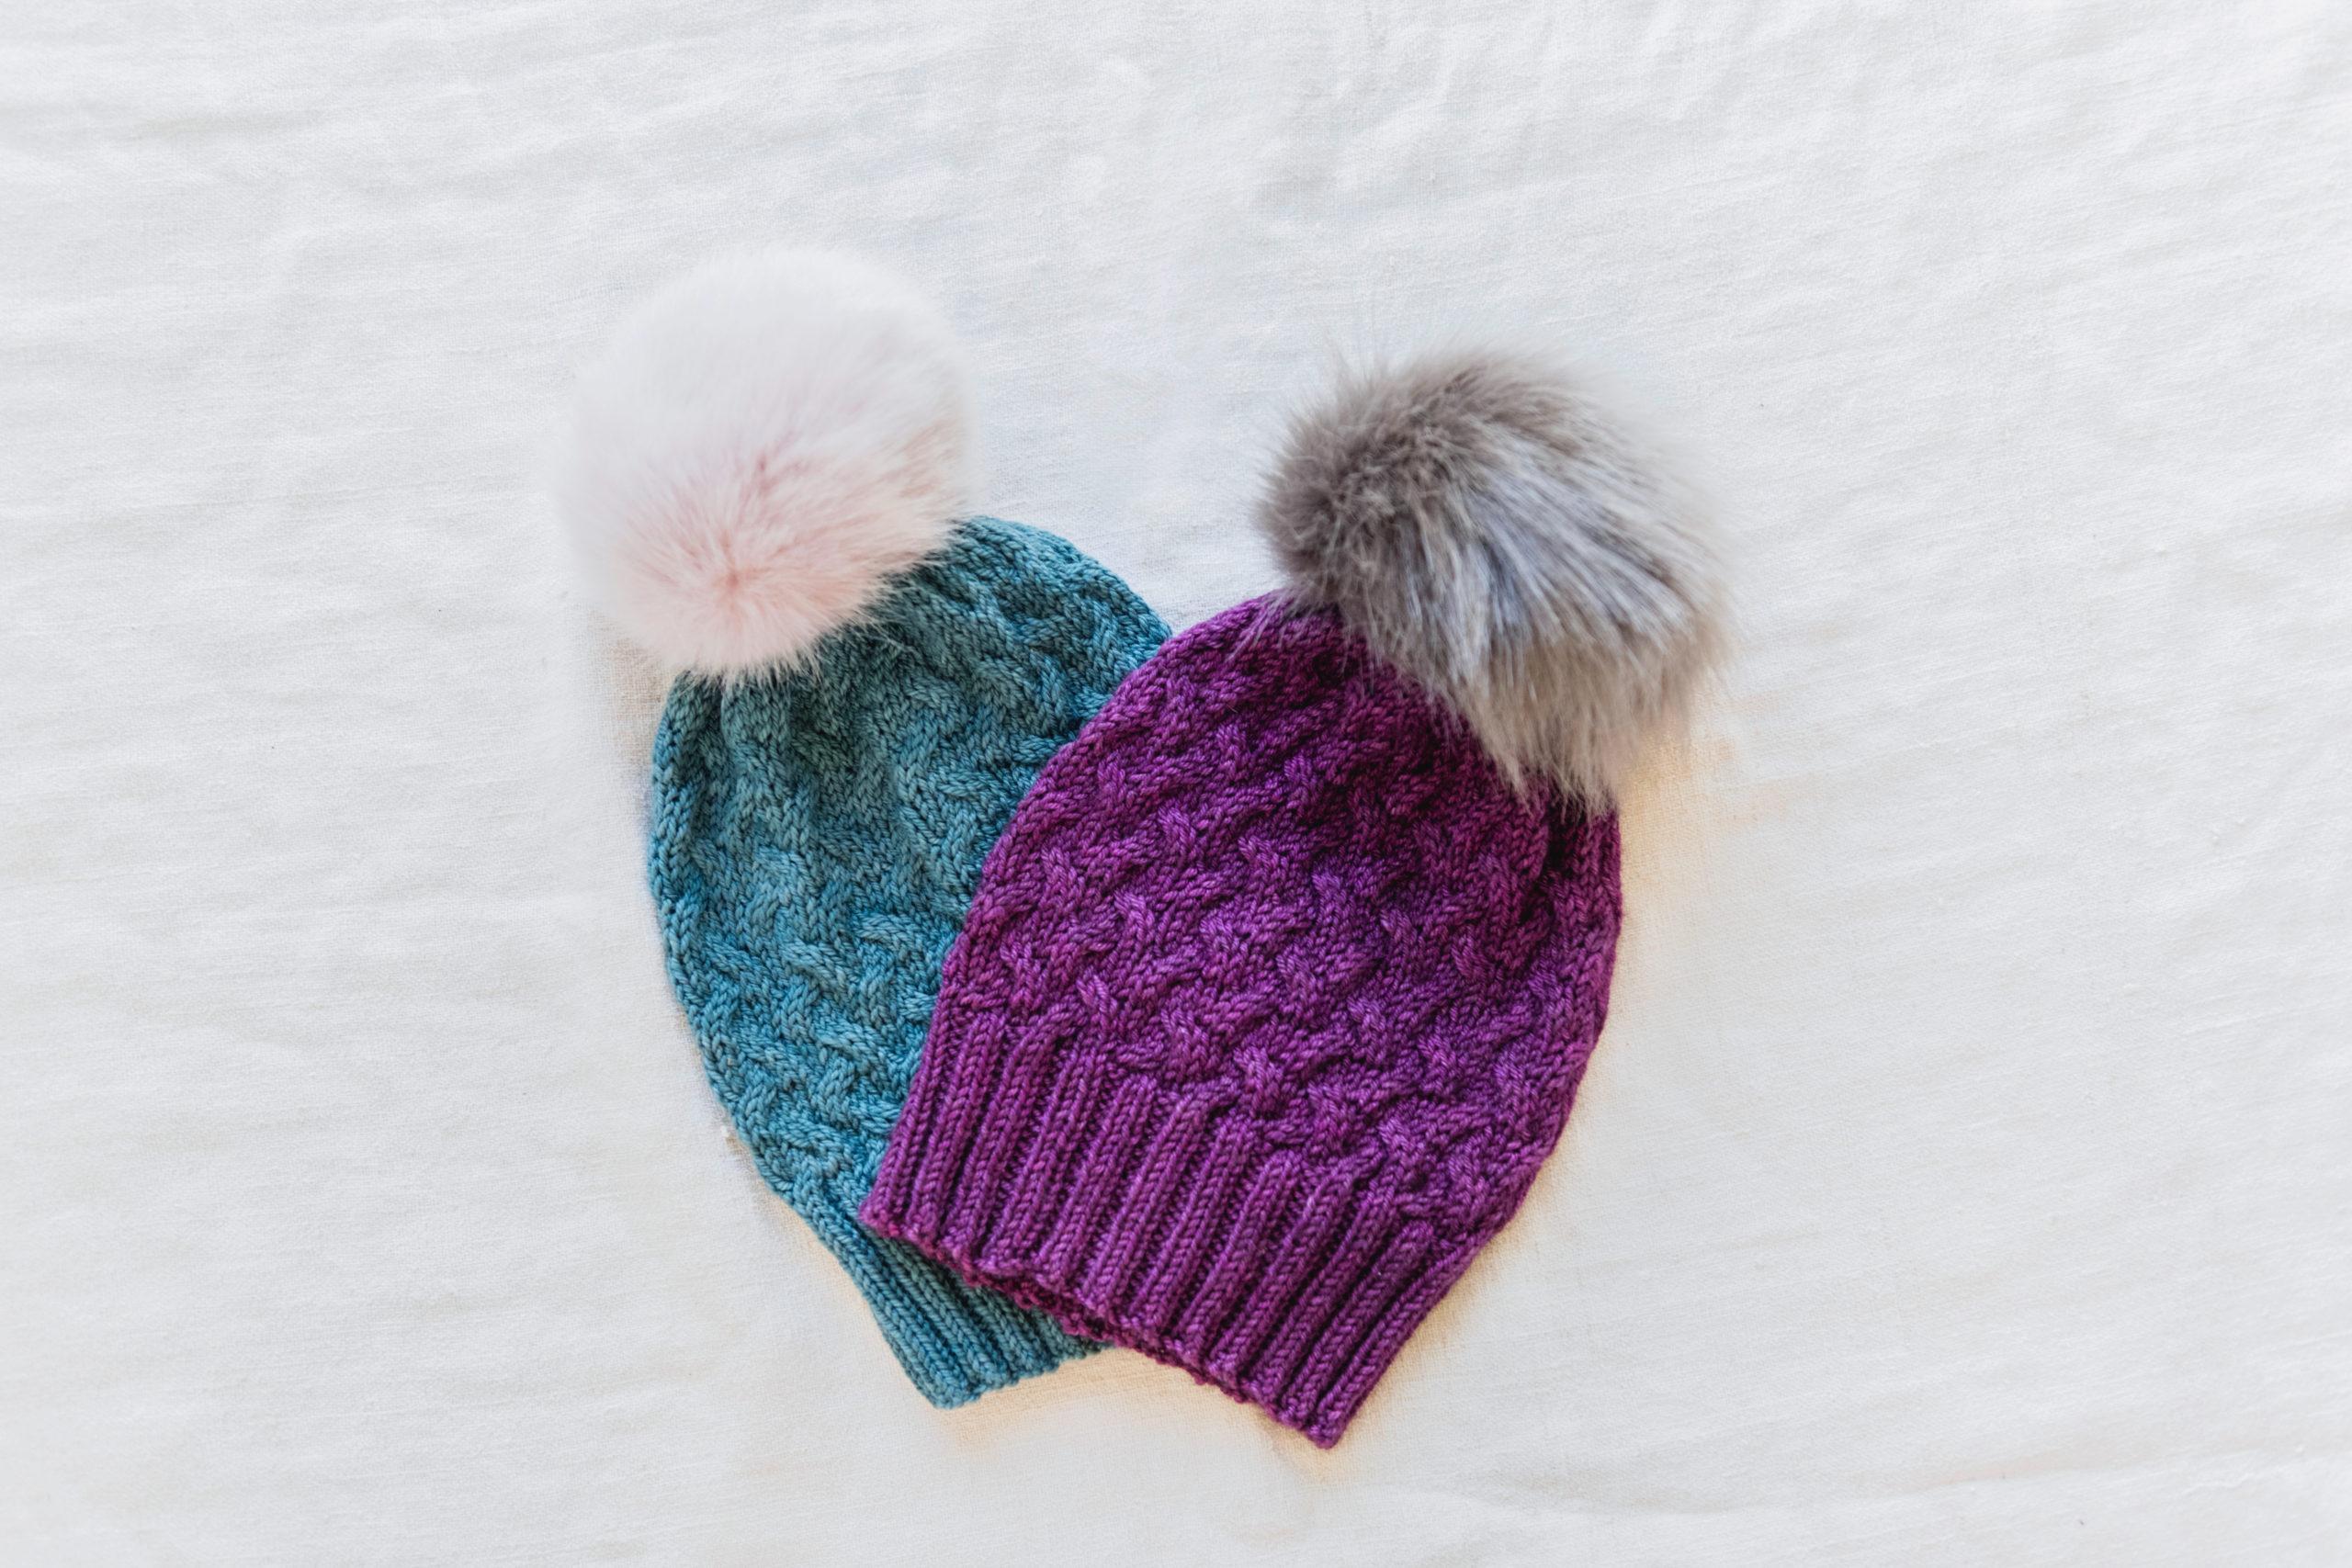 A green and purple knit bobble hat with a fluffy fur-like bobble